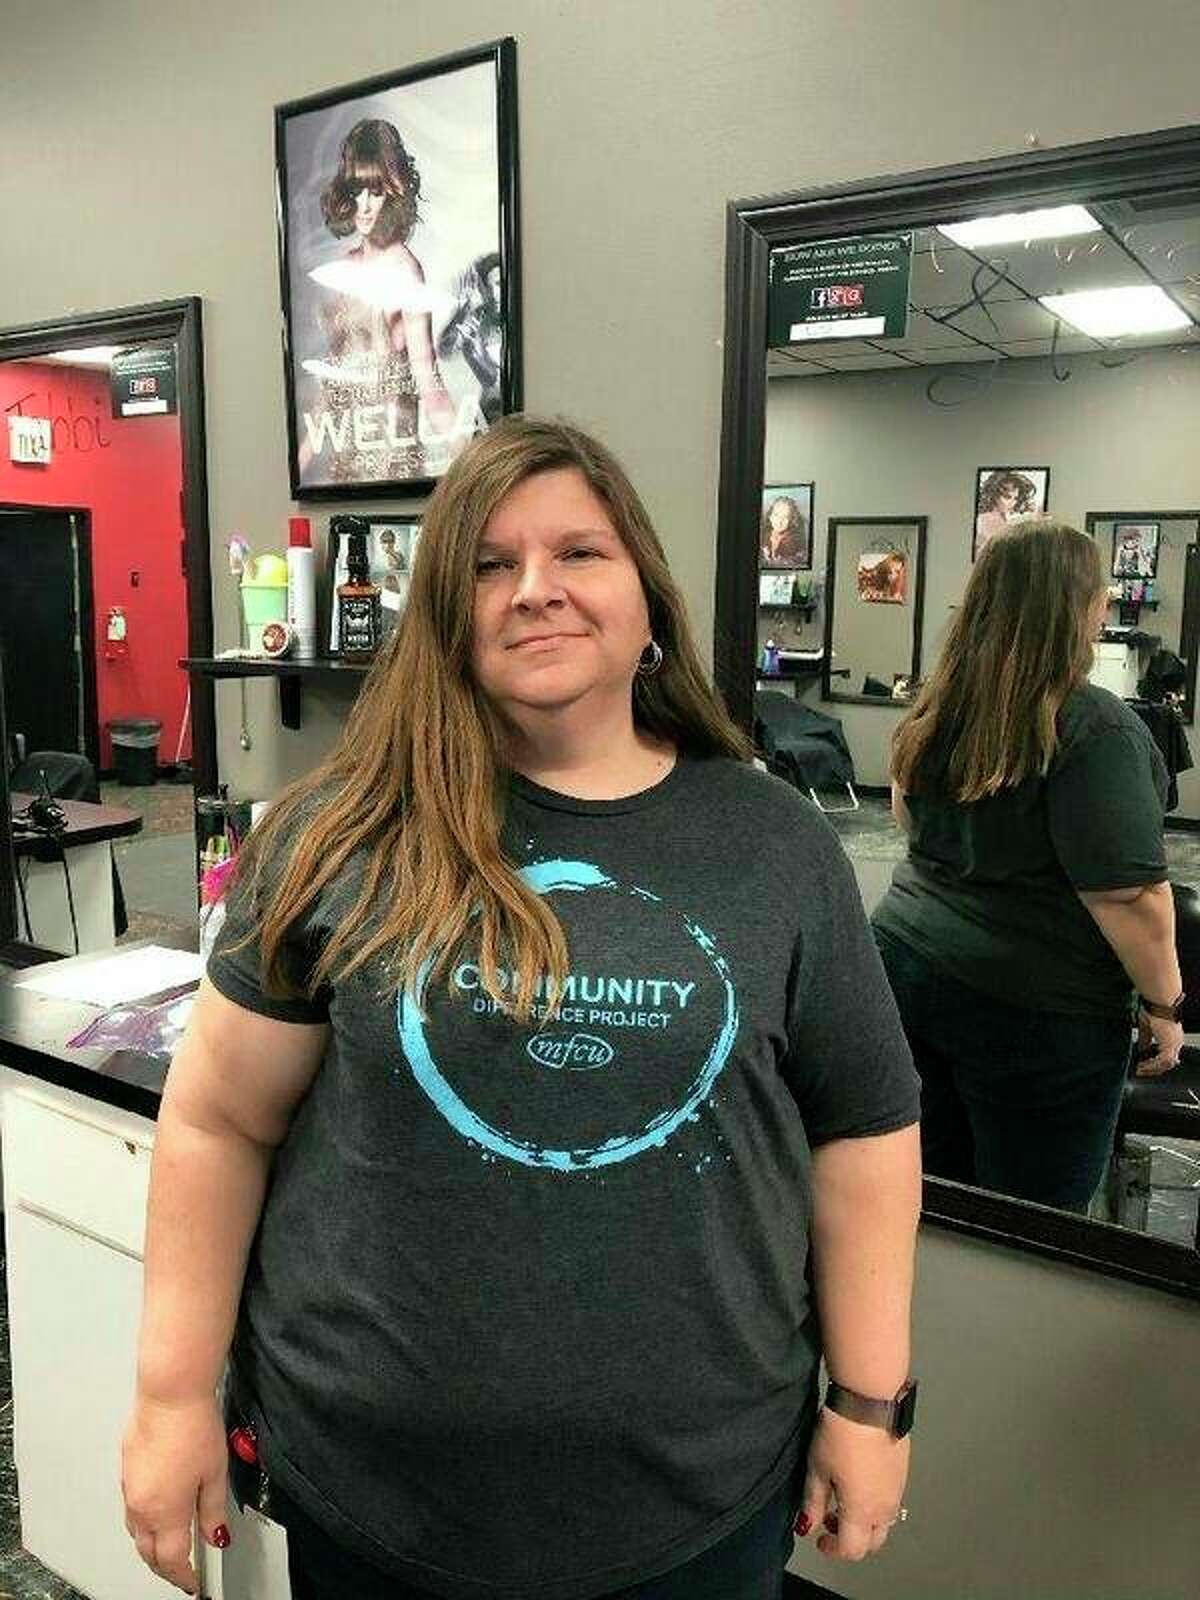 Members First Credit Union employee Melanie Duke before her head is shaved. (Photo provided)